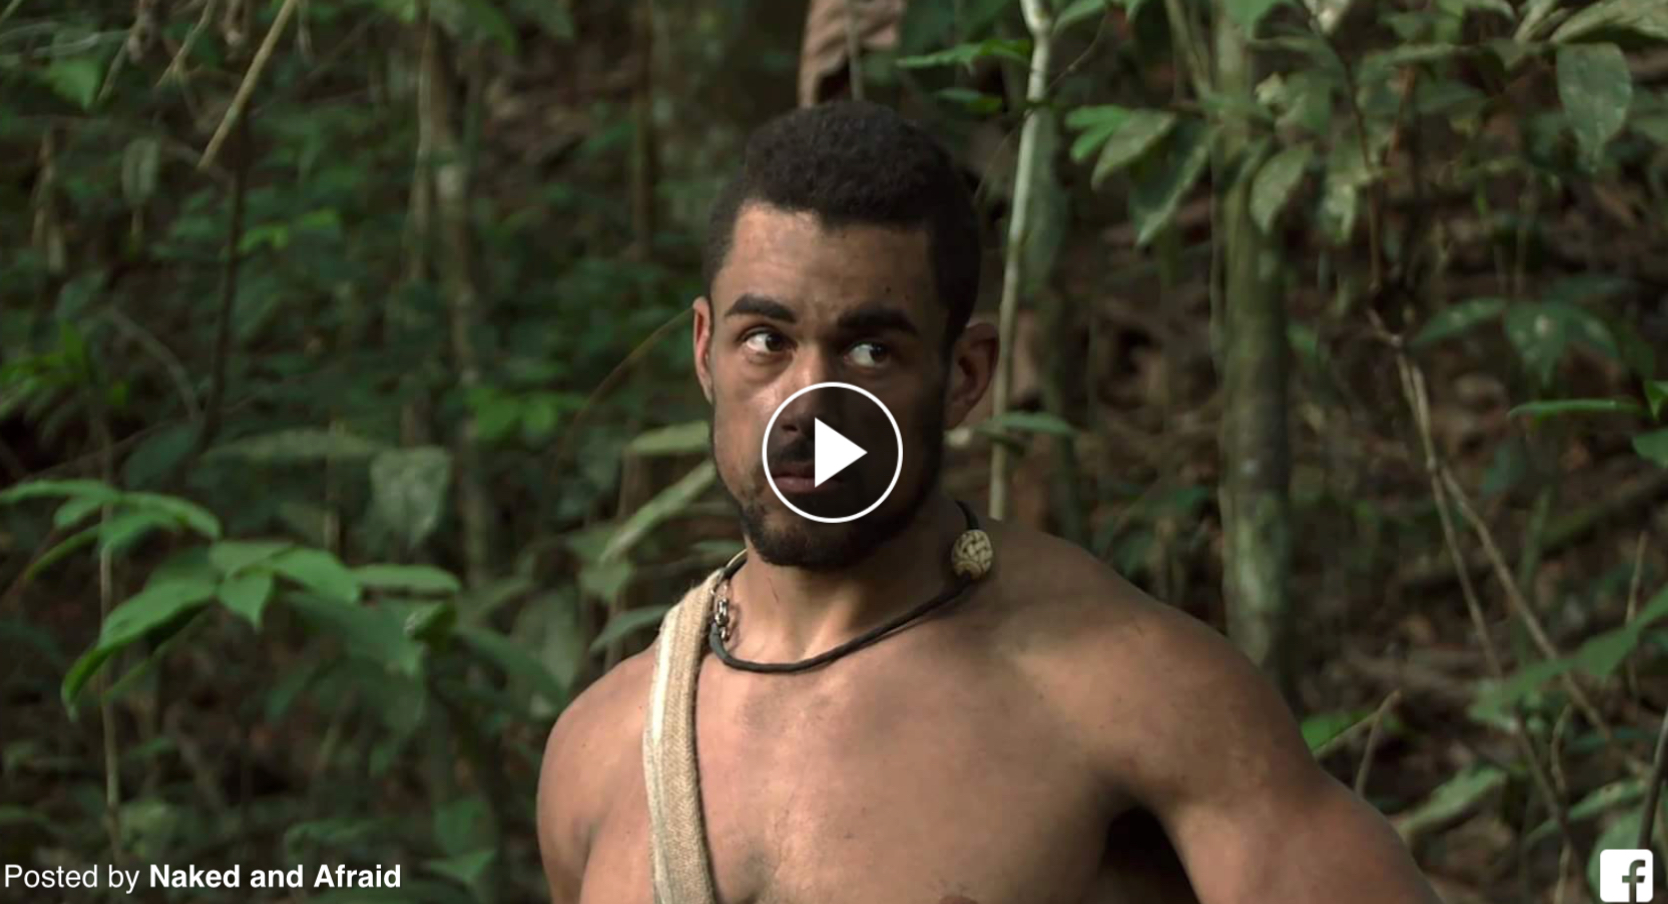 Island Nudity Naked and Afraid - YouTube sorted by. relevance. 